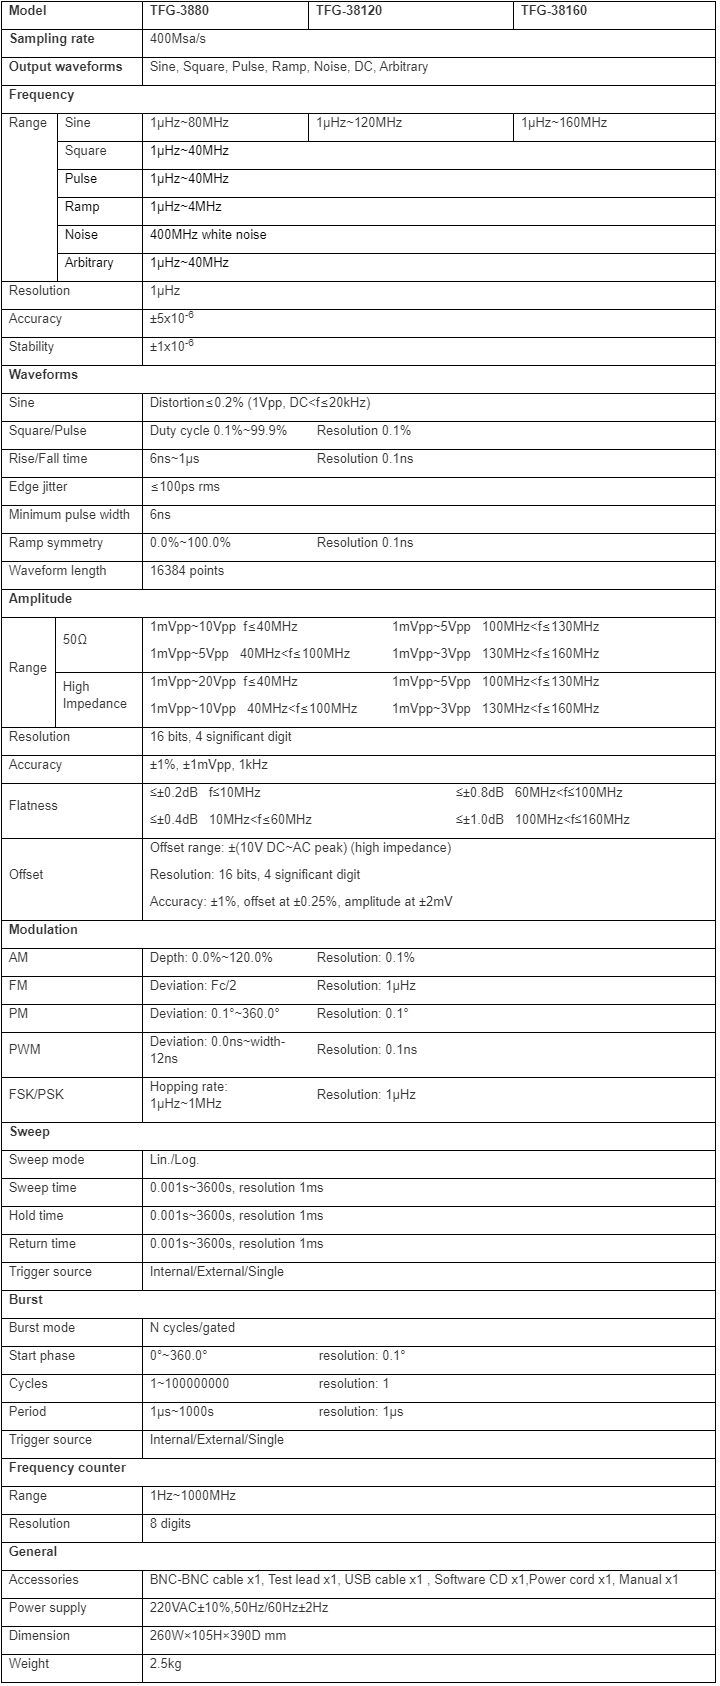 TFG-38160 Product Specifications